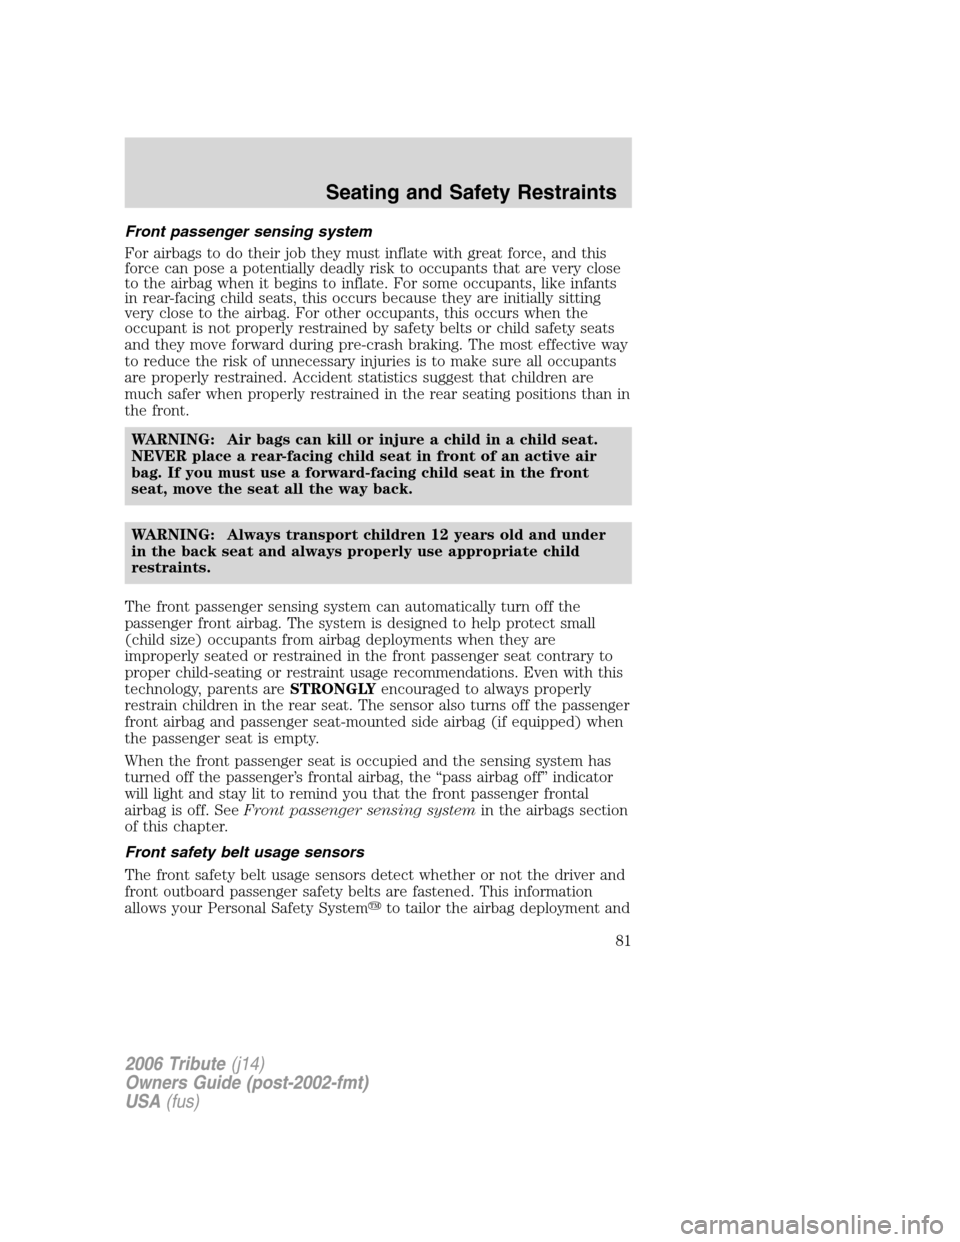 MAZDA MODEL TRIBUTE 2006  Owners Manual (in English) Front passenger sensing system
For airbags to do their job they must inflate with great force, and this
force can pose a potentially deadly risk to occupants that are very close
to the airbag when it 